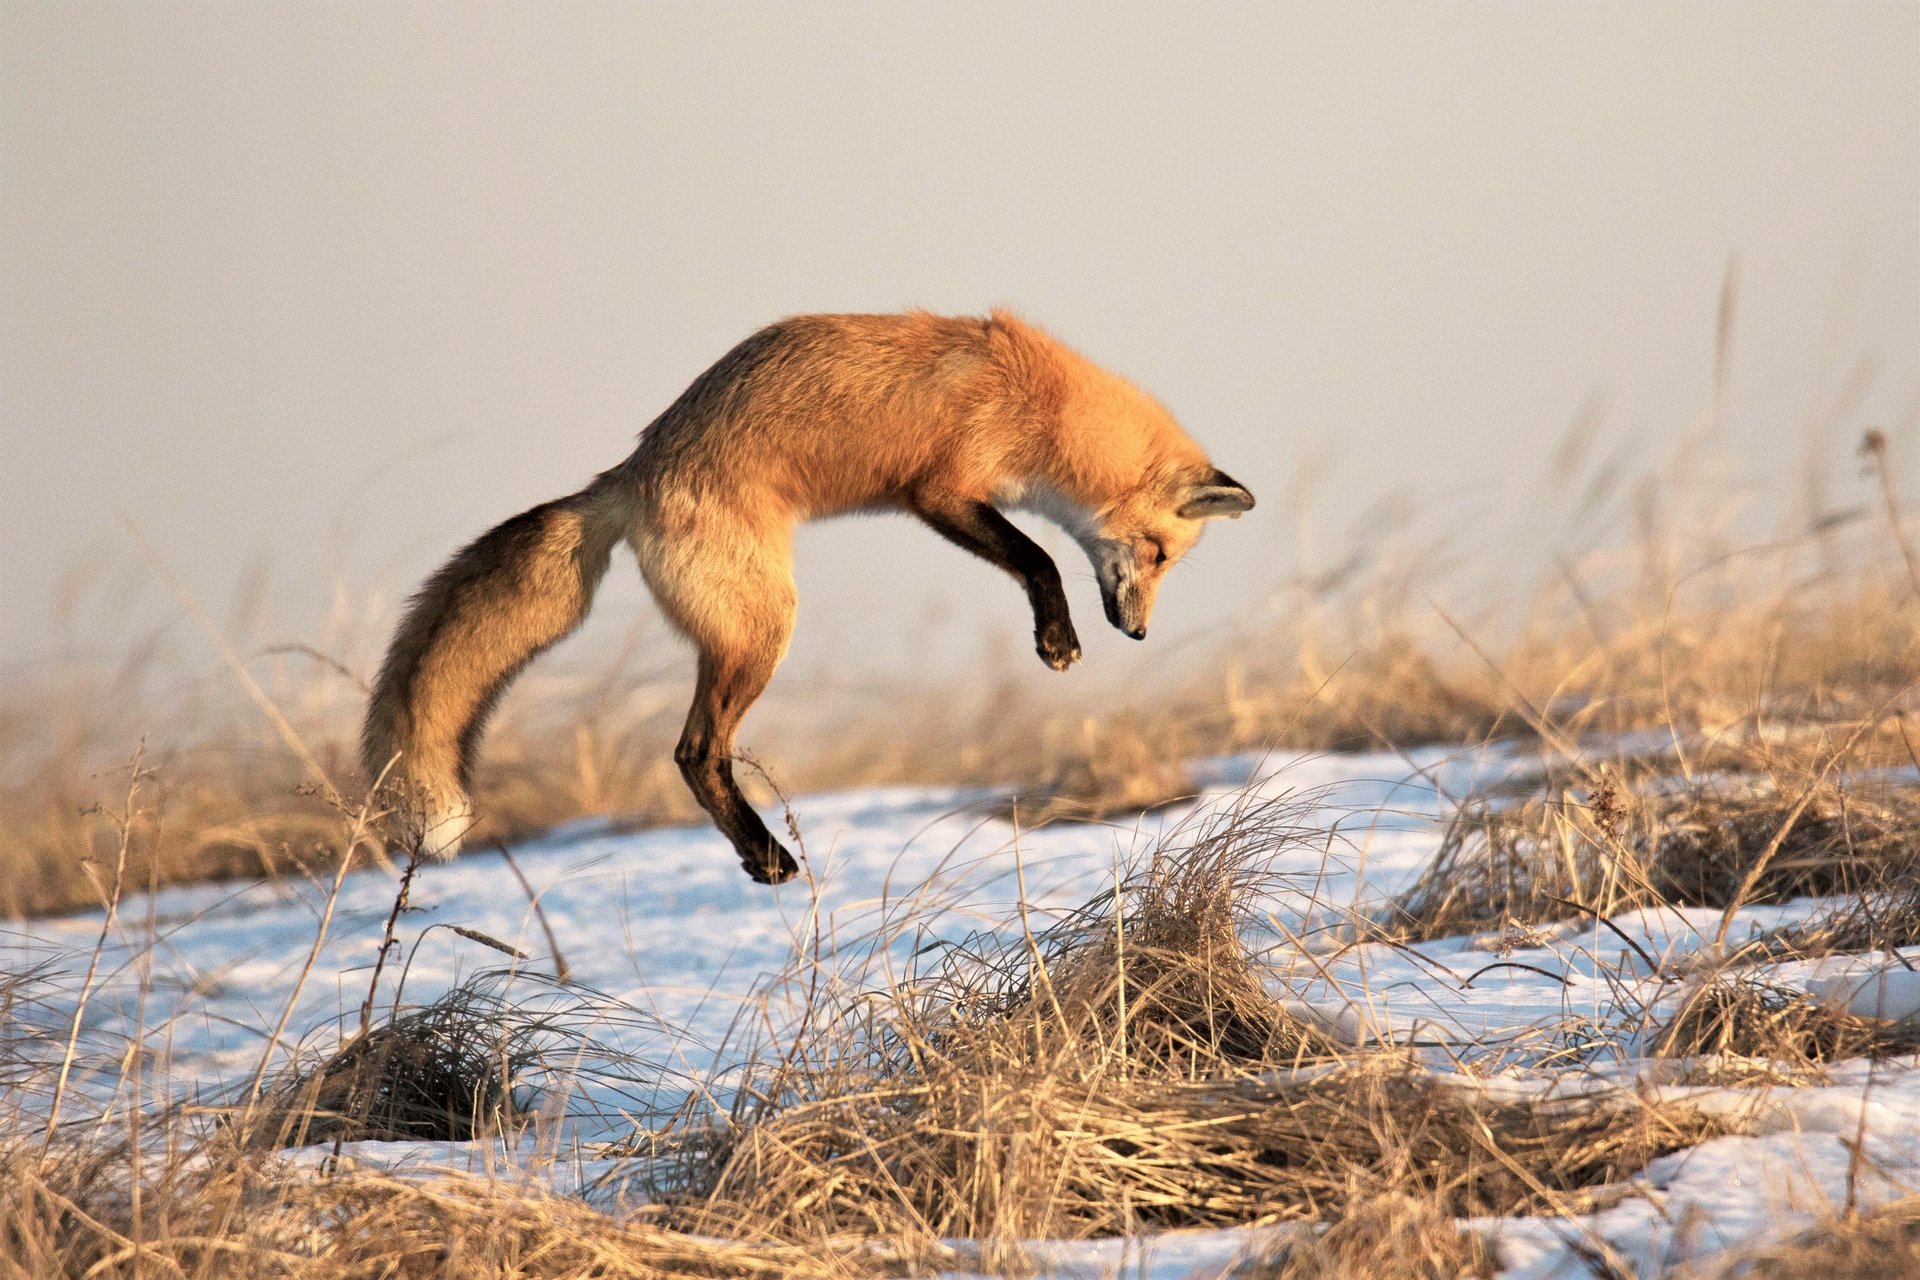 A red fox jumping in the air looking straight down. There is snow and dead vegetation below the fox.